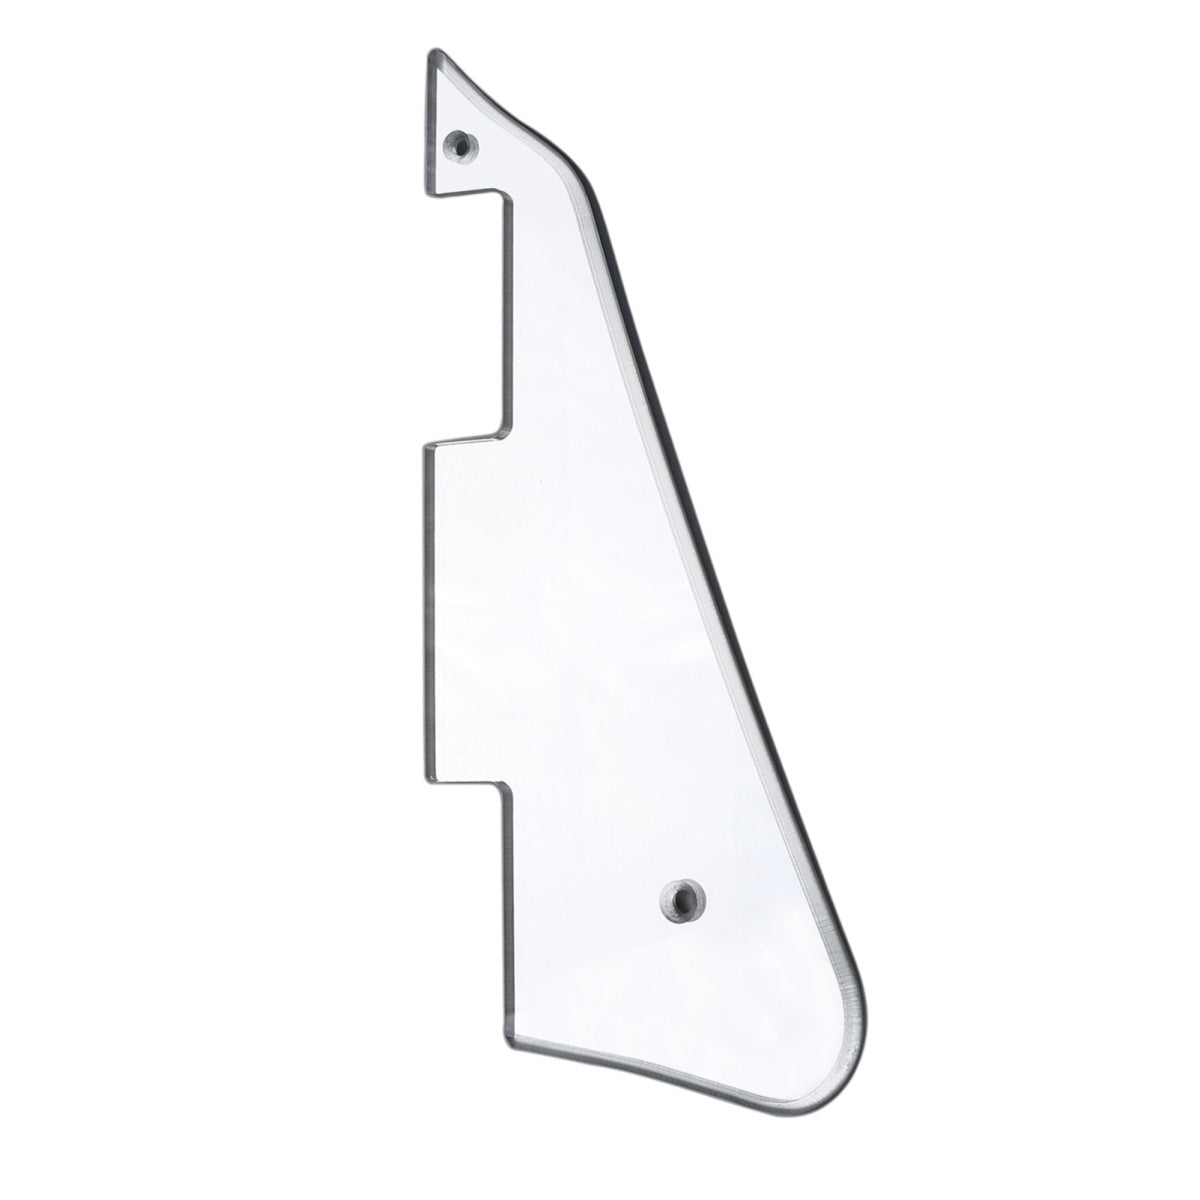 Musiclily Electric Guitar Pickguard for Gibson Les Paul Modern Style,1Ply Silver Mirror Acrylic